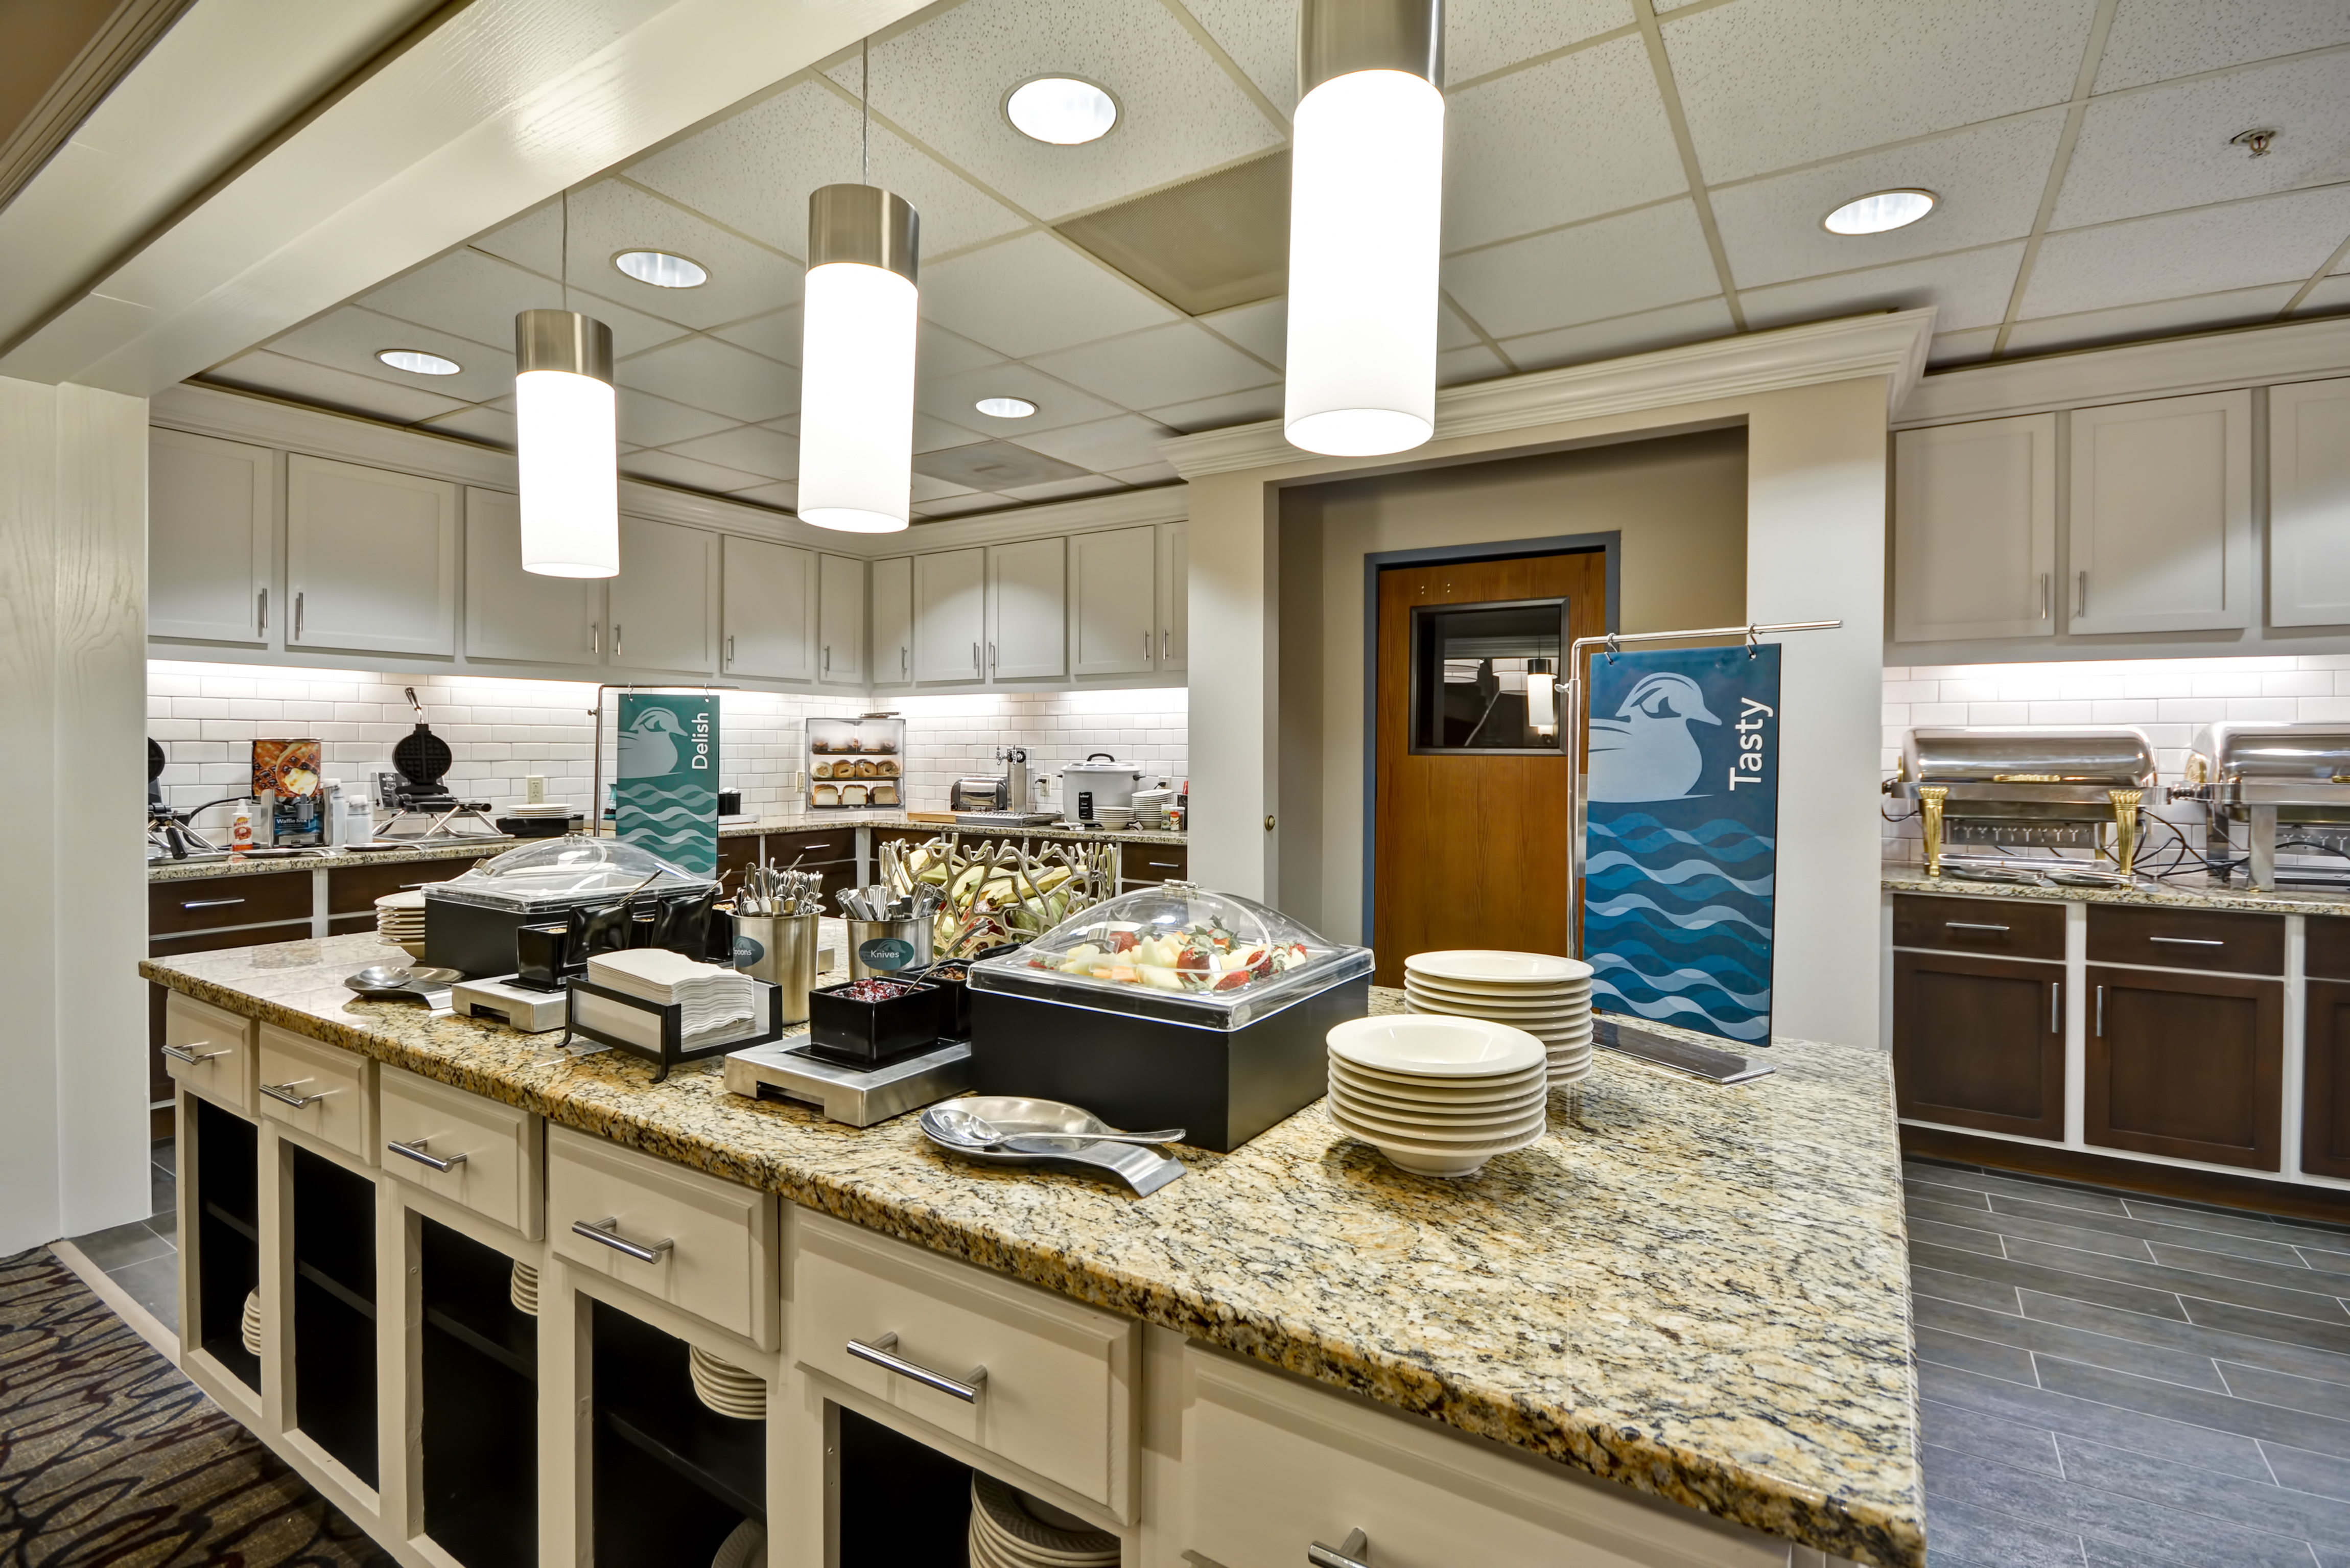 Breakfast serving area with coffee, juice, snacks, and dining amenities